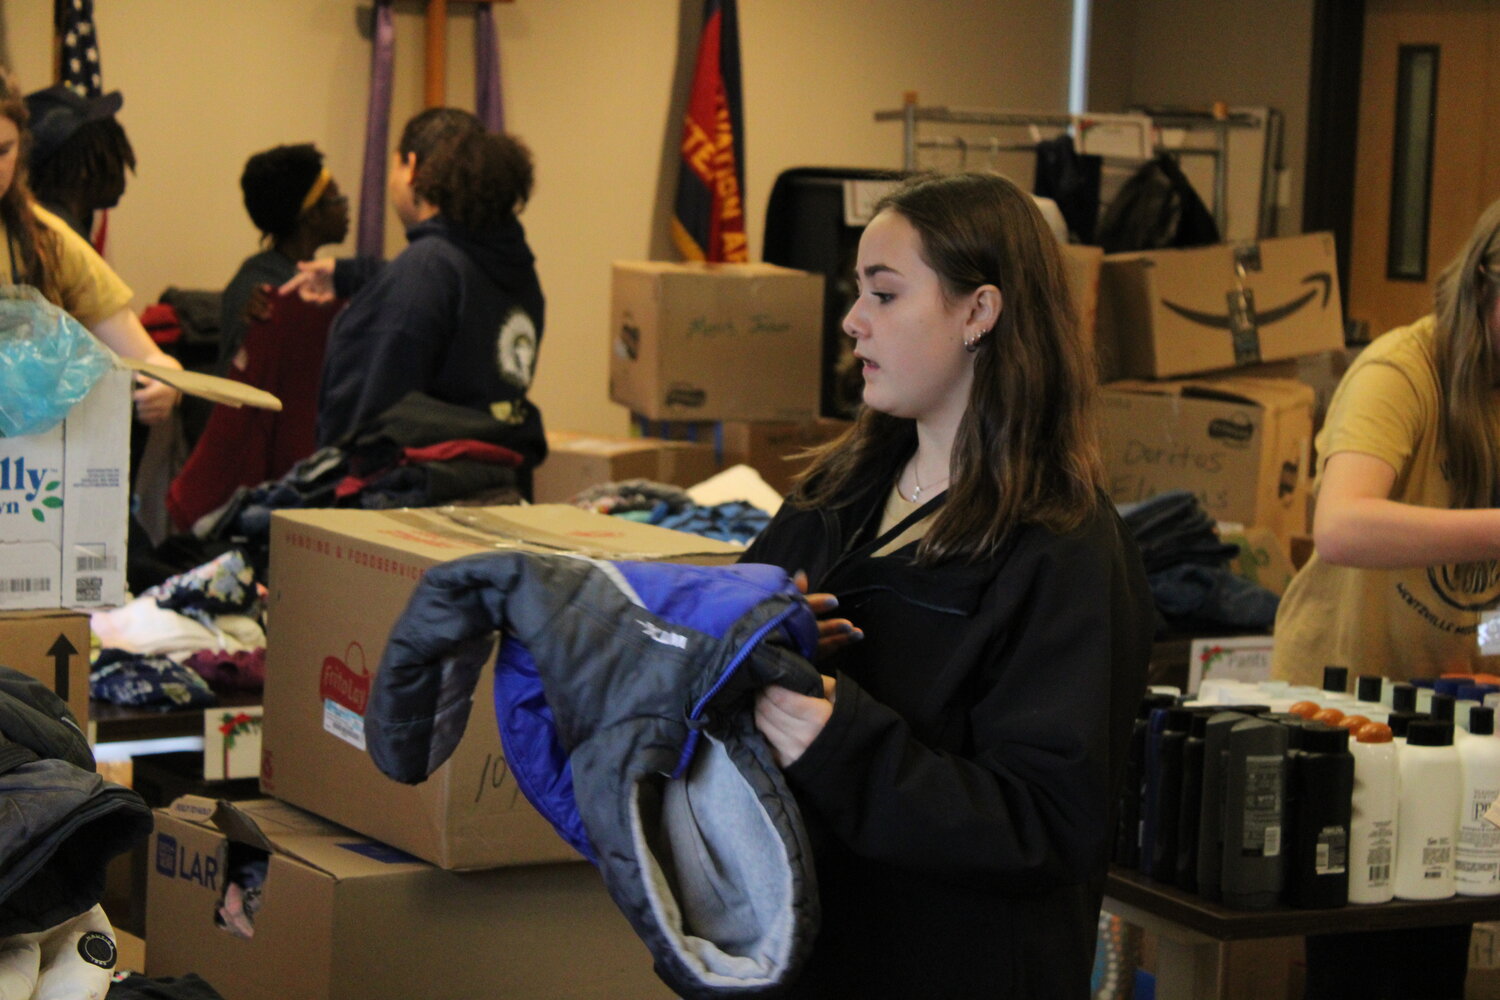 McKenzie Fry holds one of the coats donated as she prepares to place it in its proper location so it can be collected by a homeless individual later that morning.